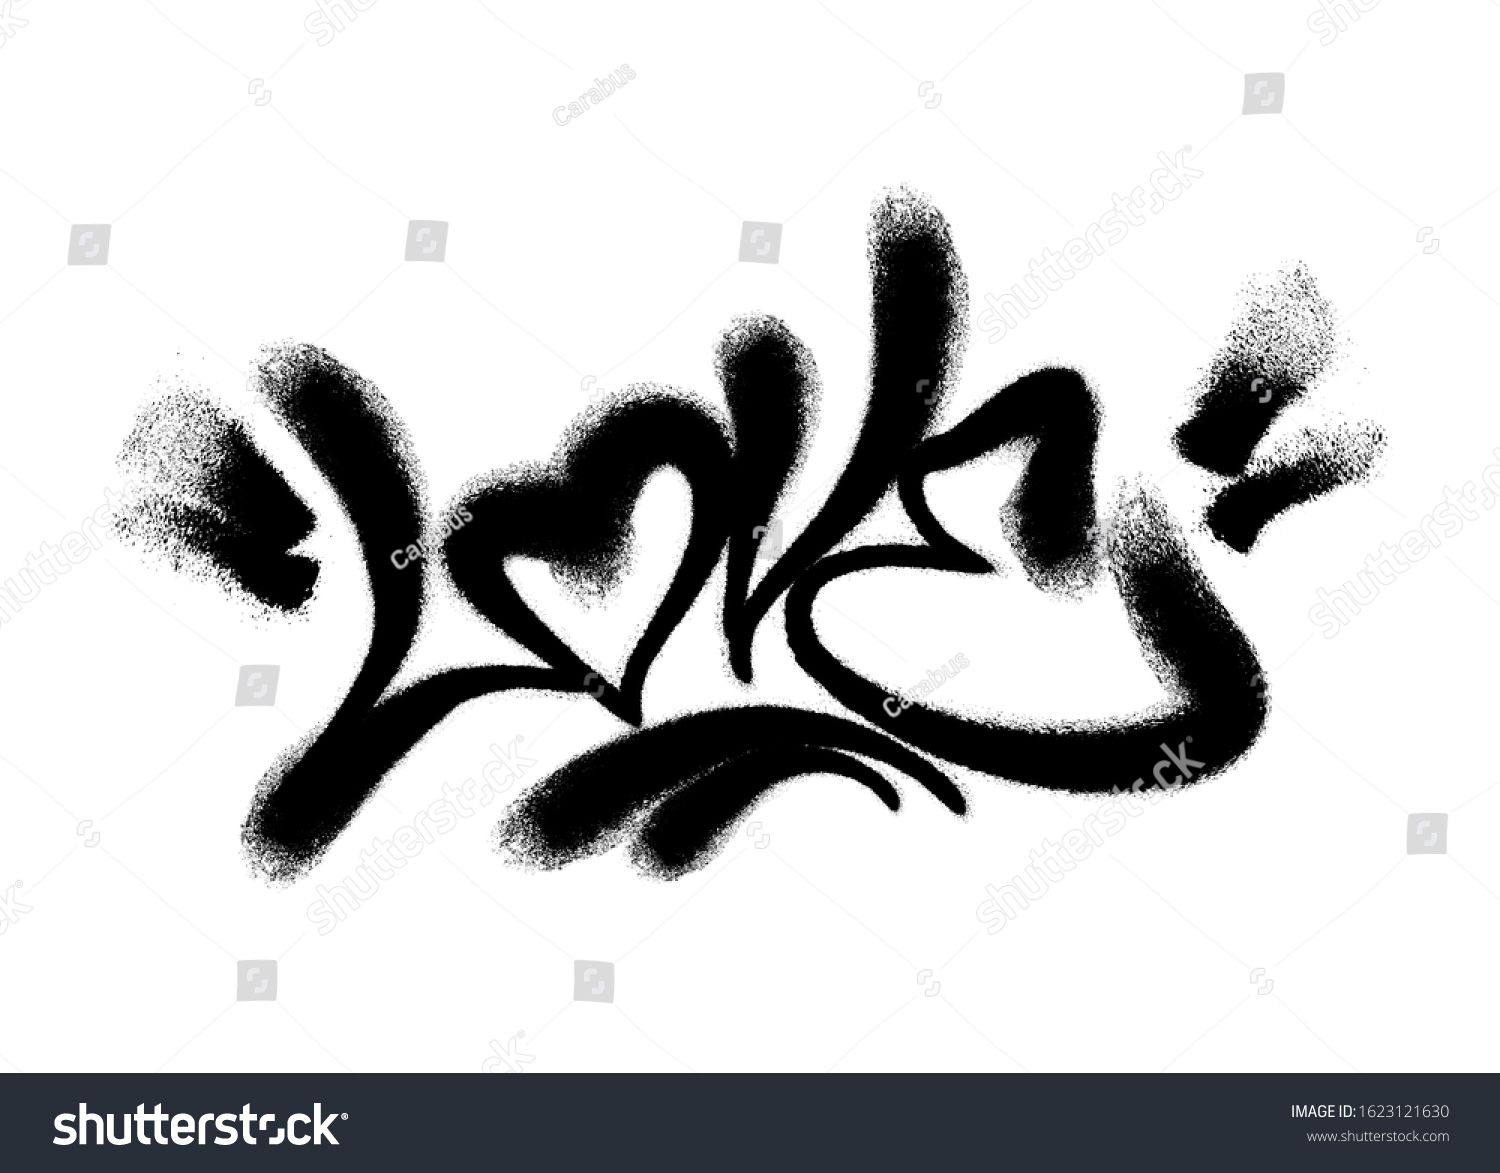 SVG of Sprayed love font graffiti with overspray in black over white. Vector illustration. svg